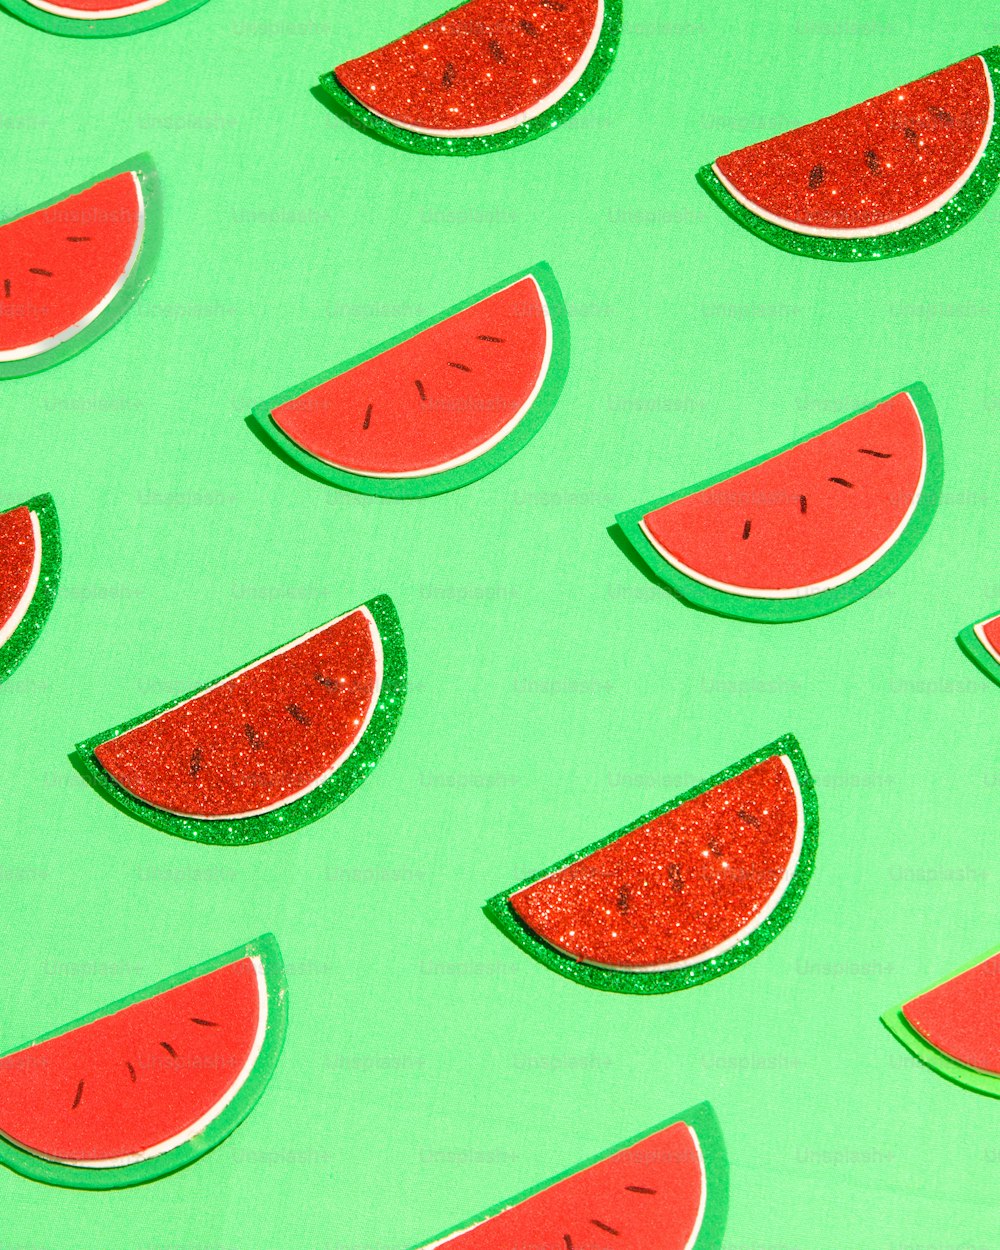 slices of watermelon on a green background